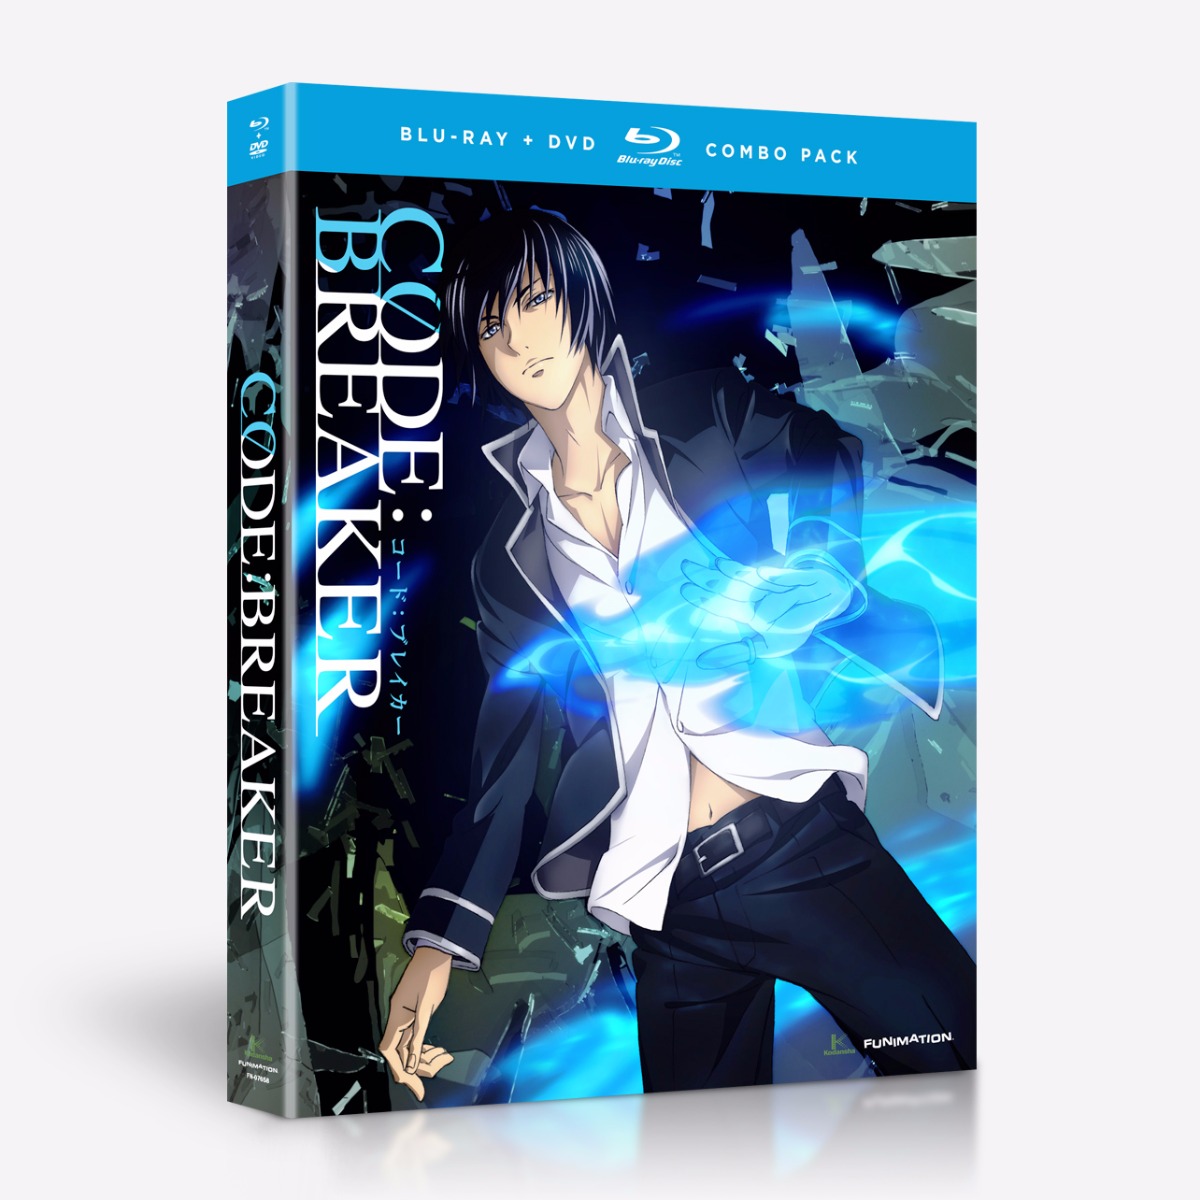 Codebreaker - The Complete Series - Blu-ray + DVD image count 0